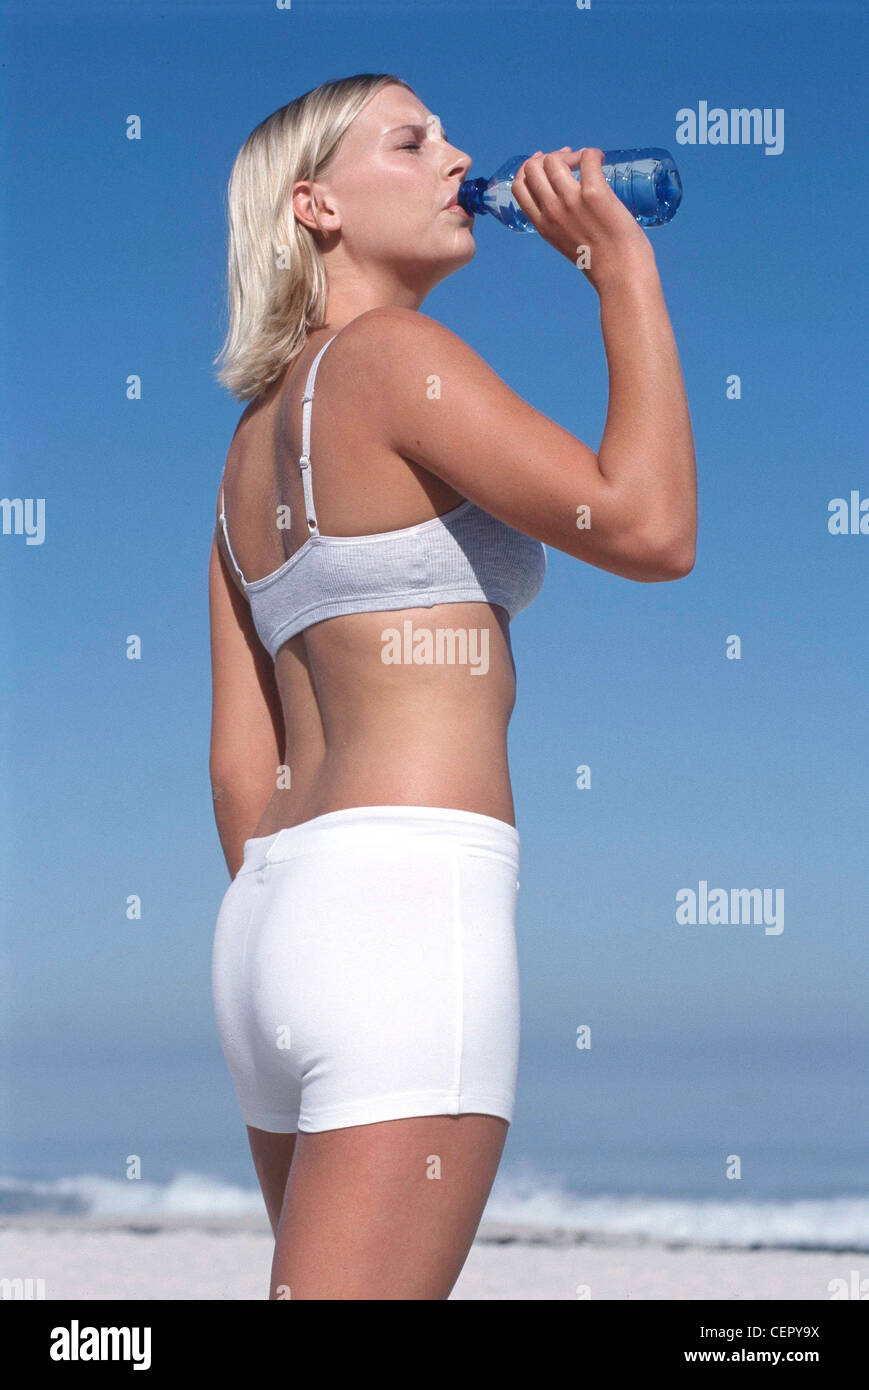 Semi profile of tanned female chin length blonde hair, wearing subtle make up grey top and white shorts, standing on beach by Stock Photo